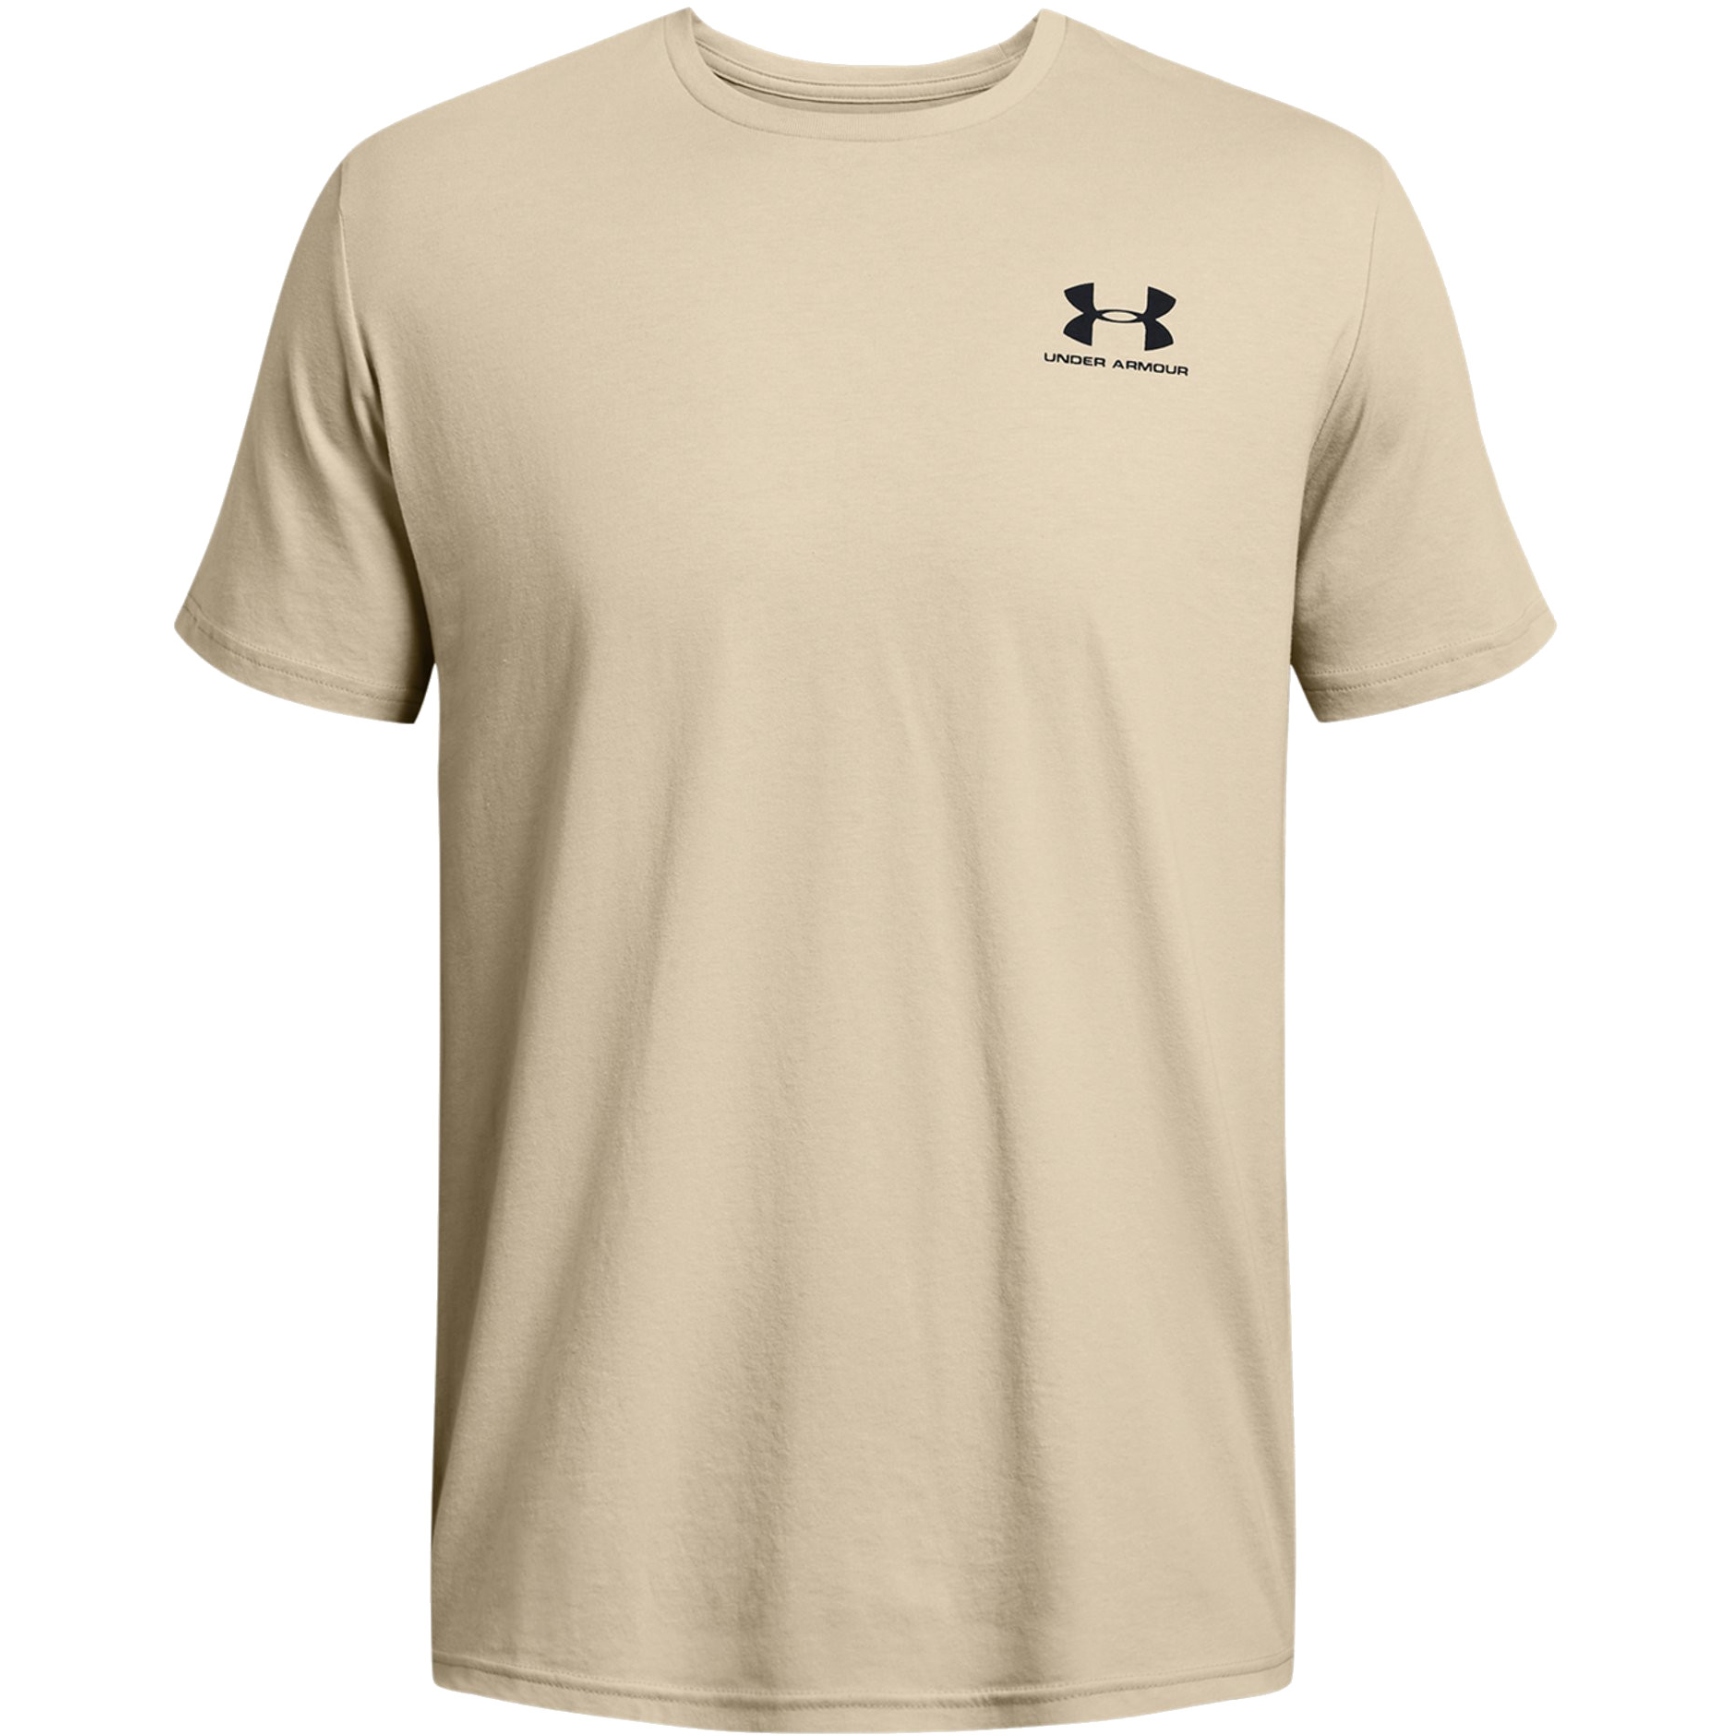 Remera Under Armour Entrenamiento Sportstyle Left Chest Mujer Blanca